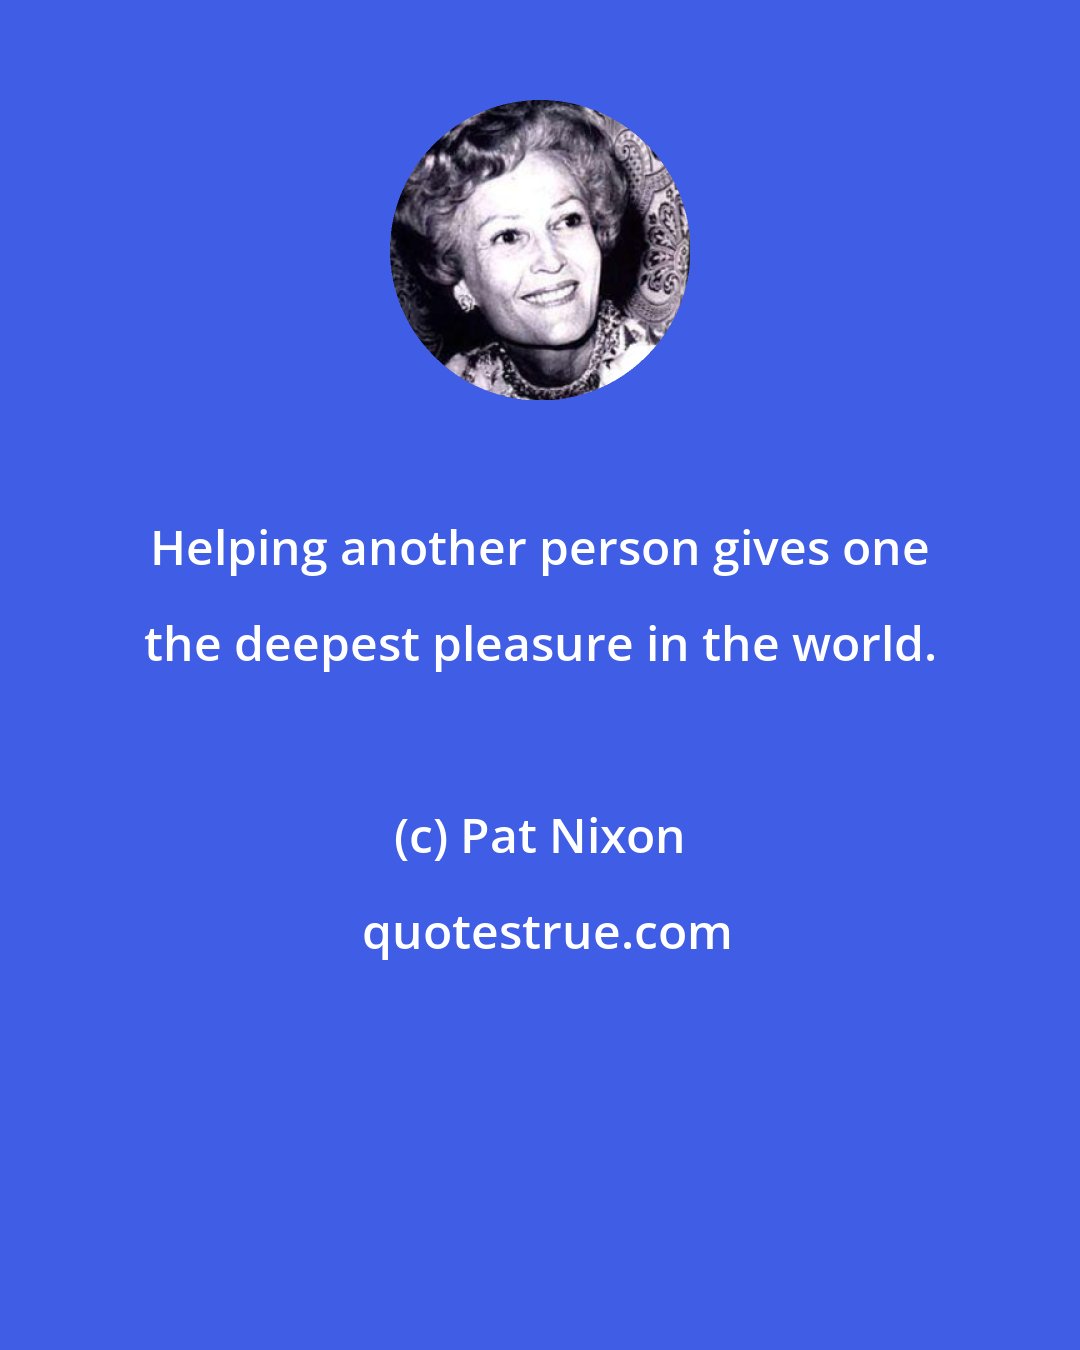 Pat Nixon: Helping another person gives one the deepest pleasure in the world.